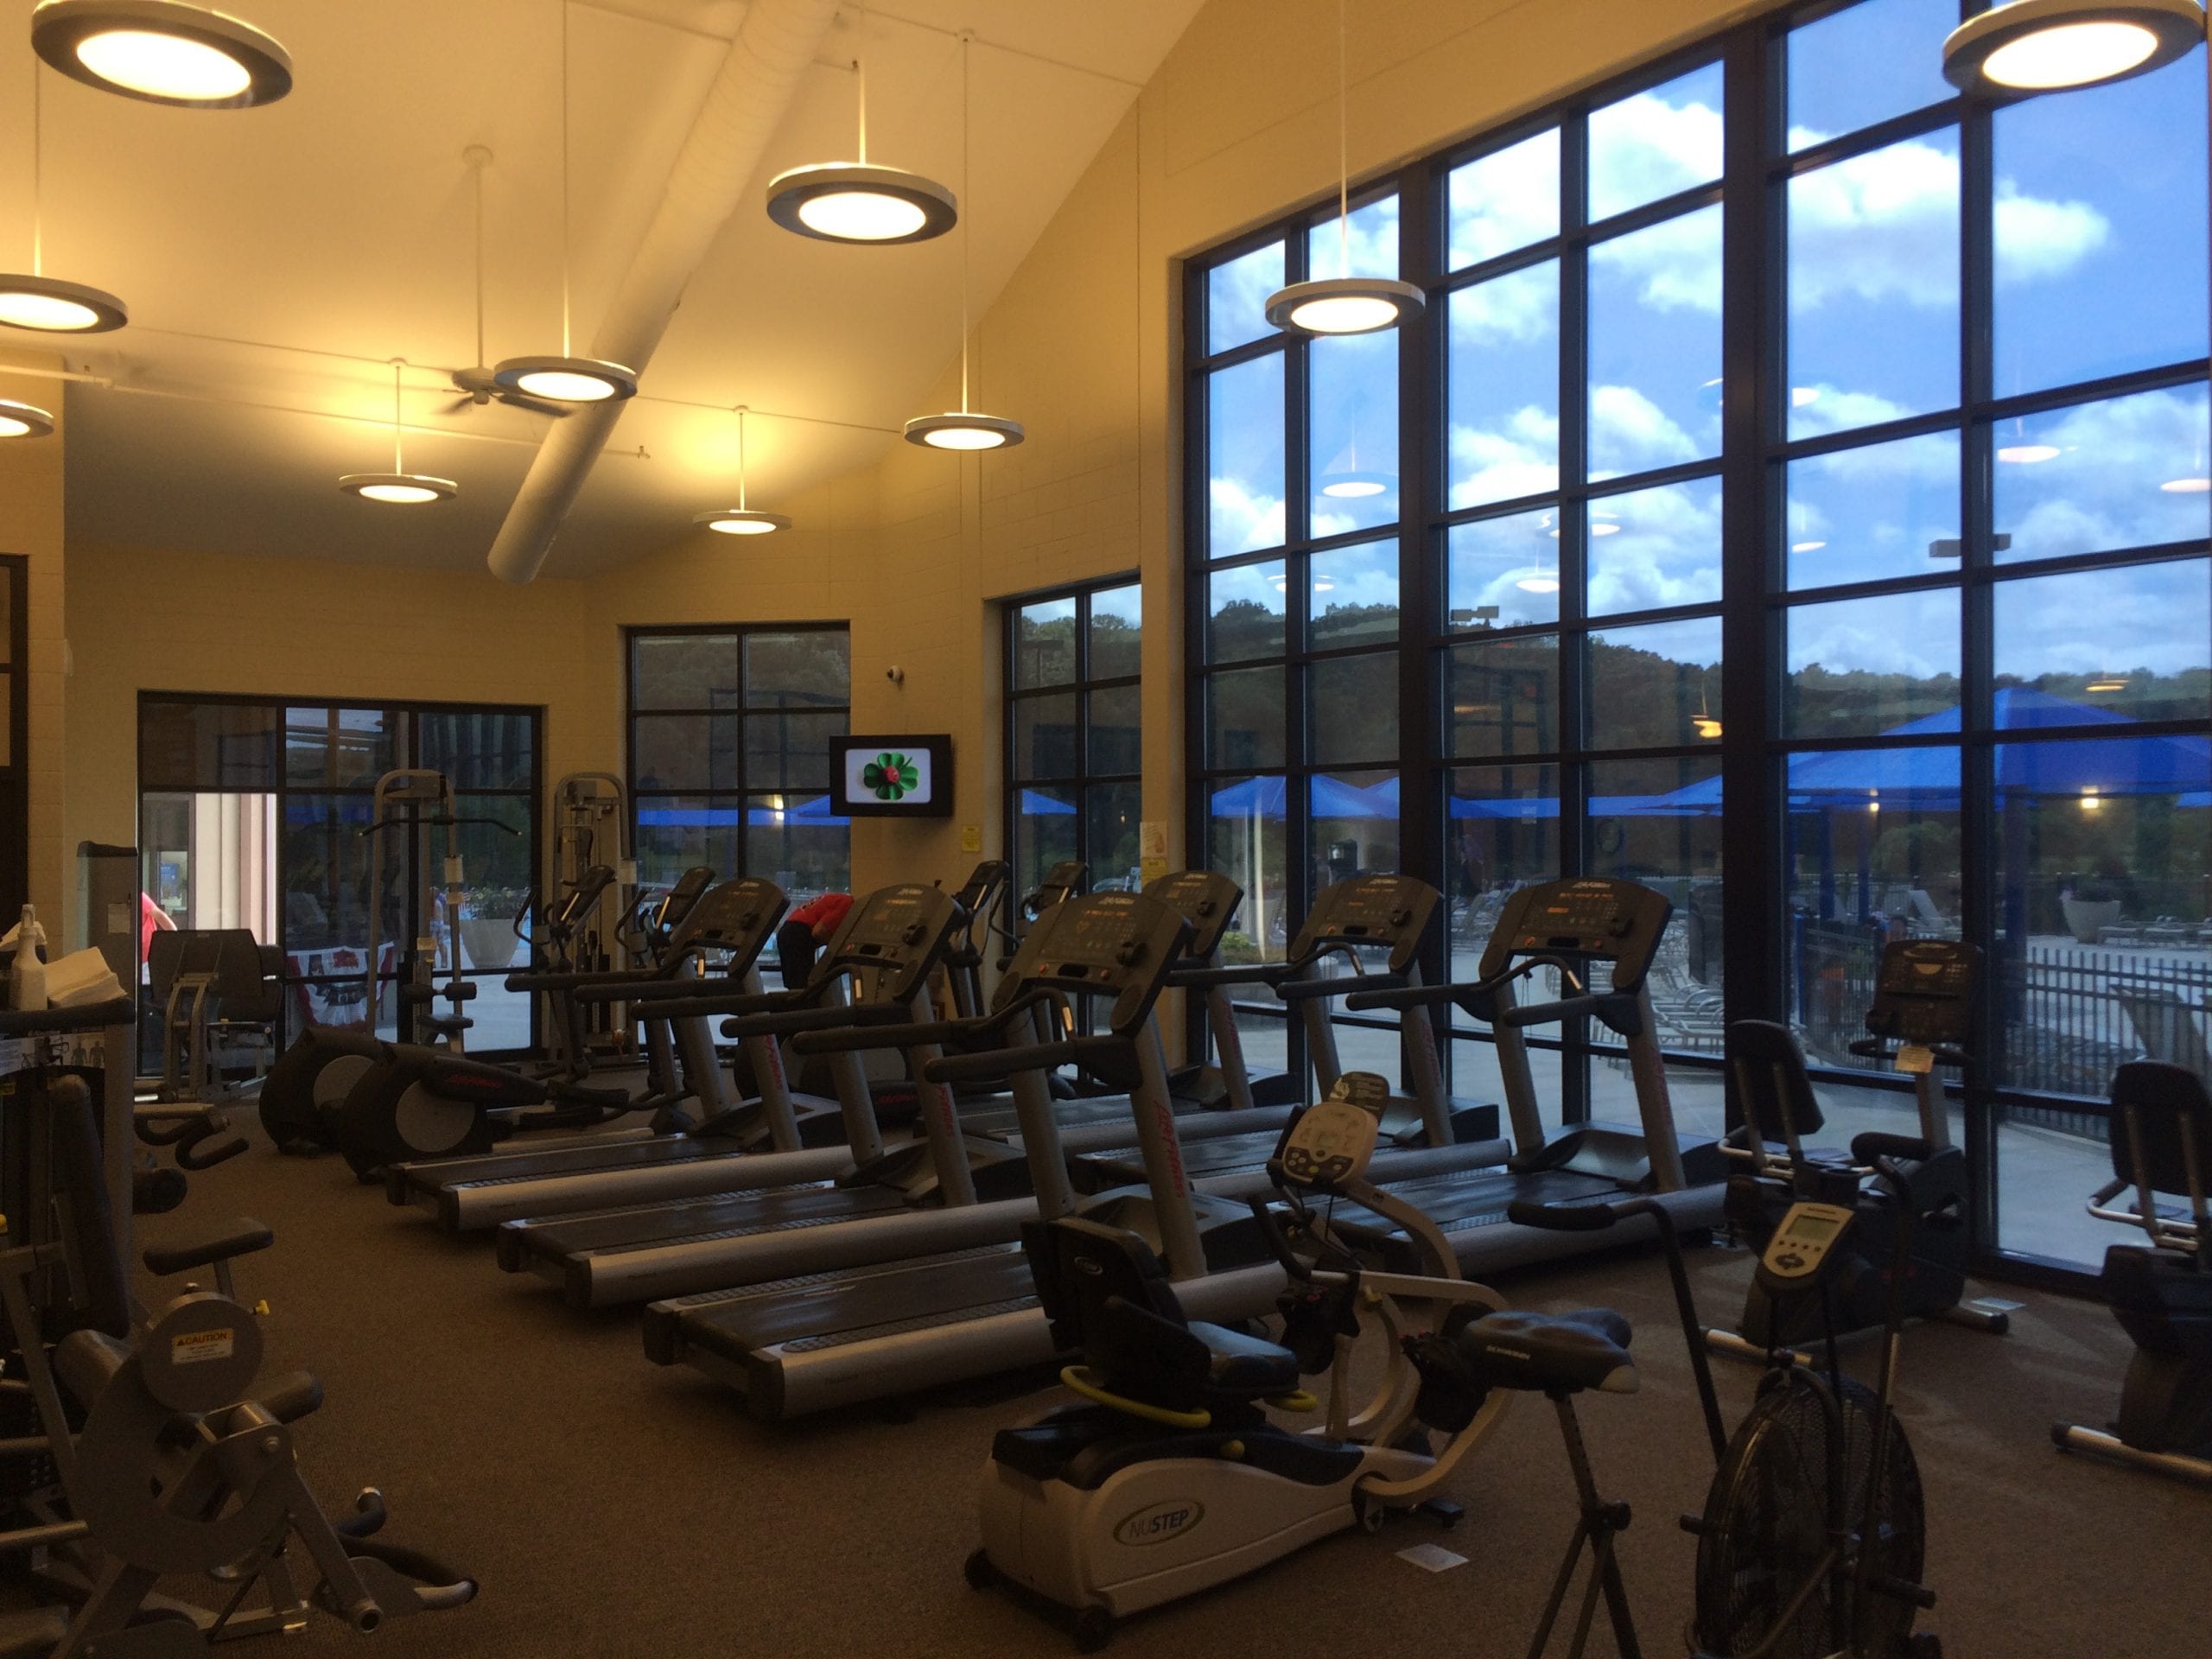 Fitness Center at Owner's Club